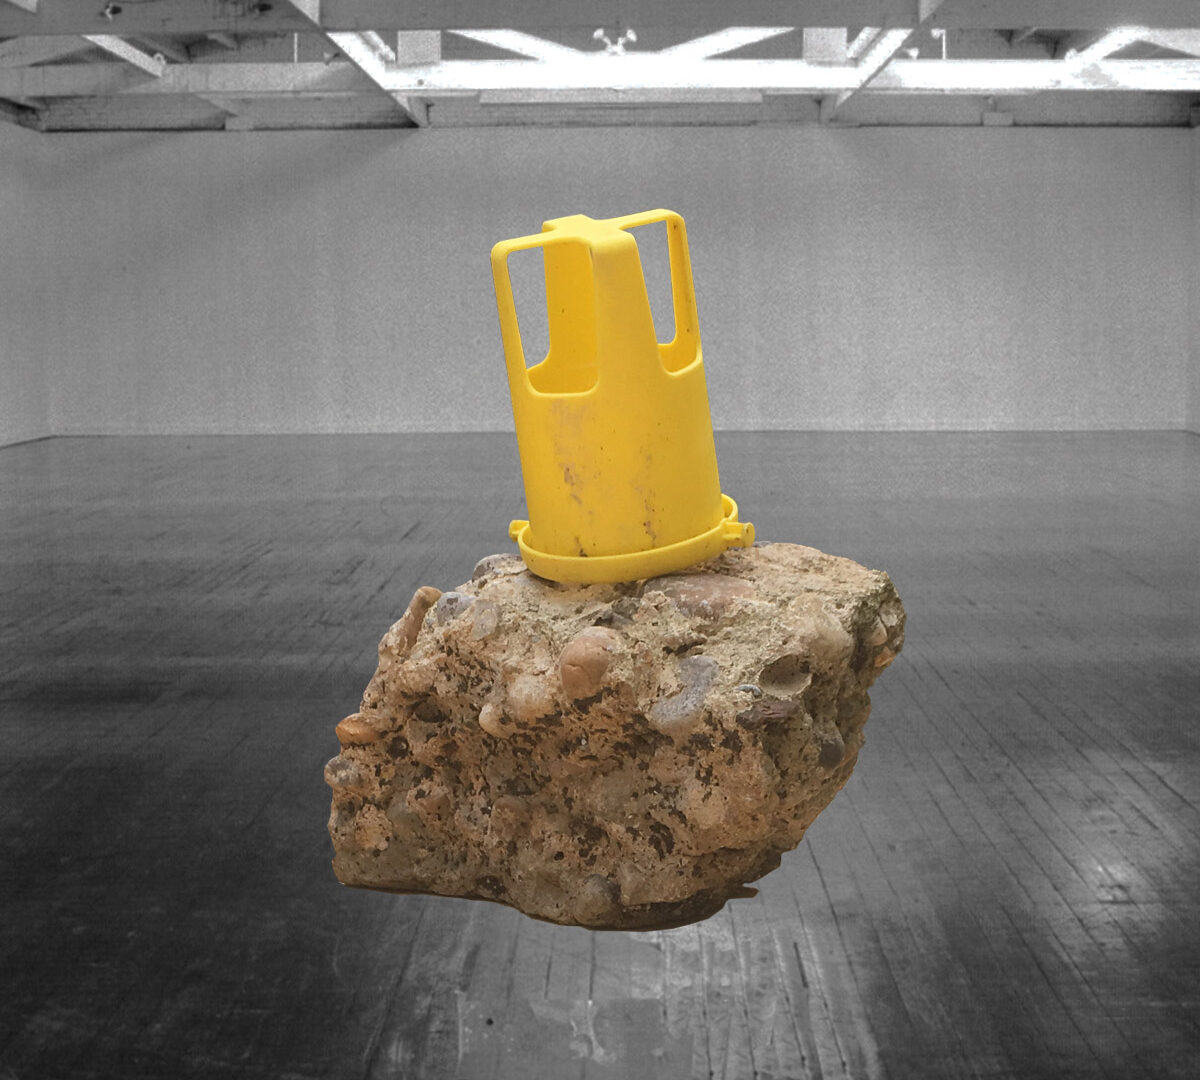 Sculpture of cement and rock with a yellow plastic item on top, hanging in a white-walled gallery with a black floor